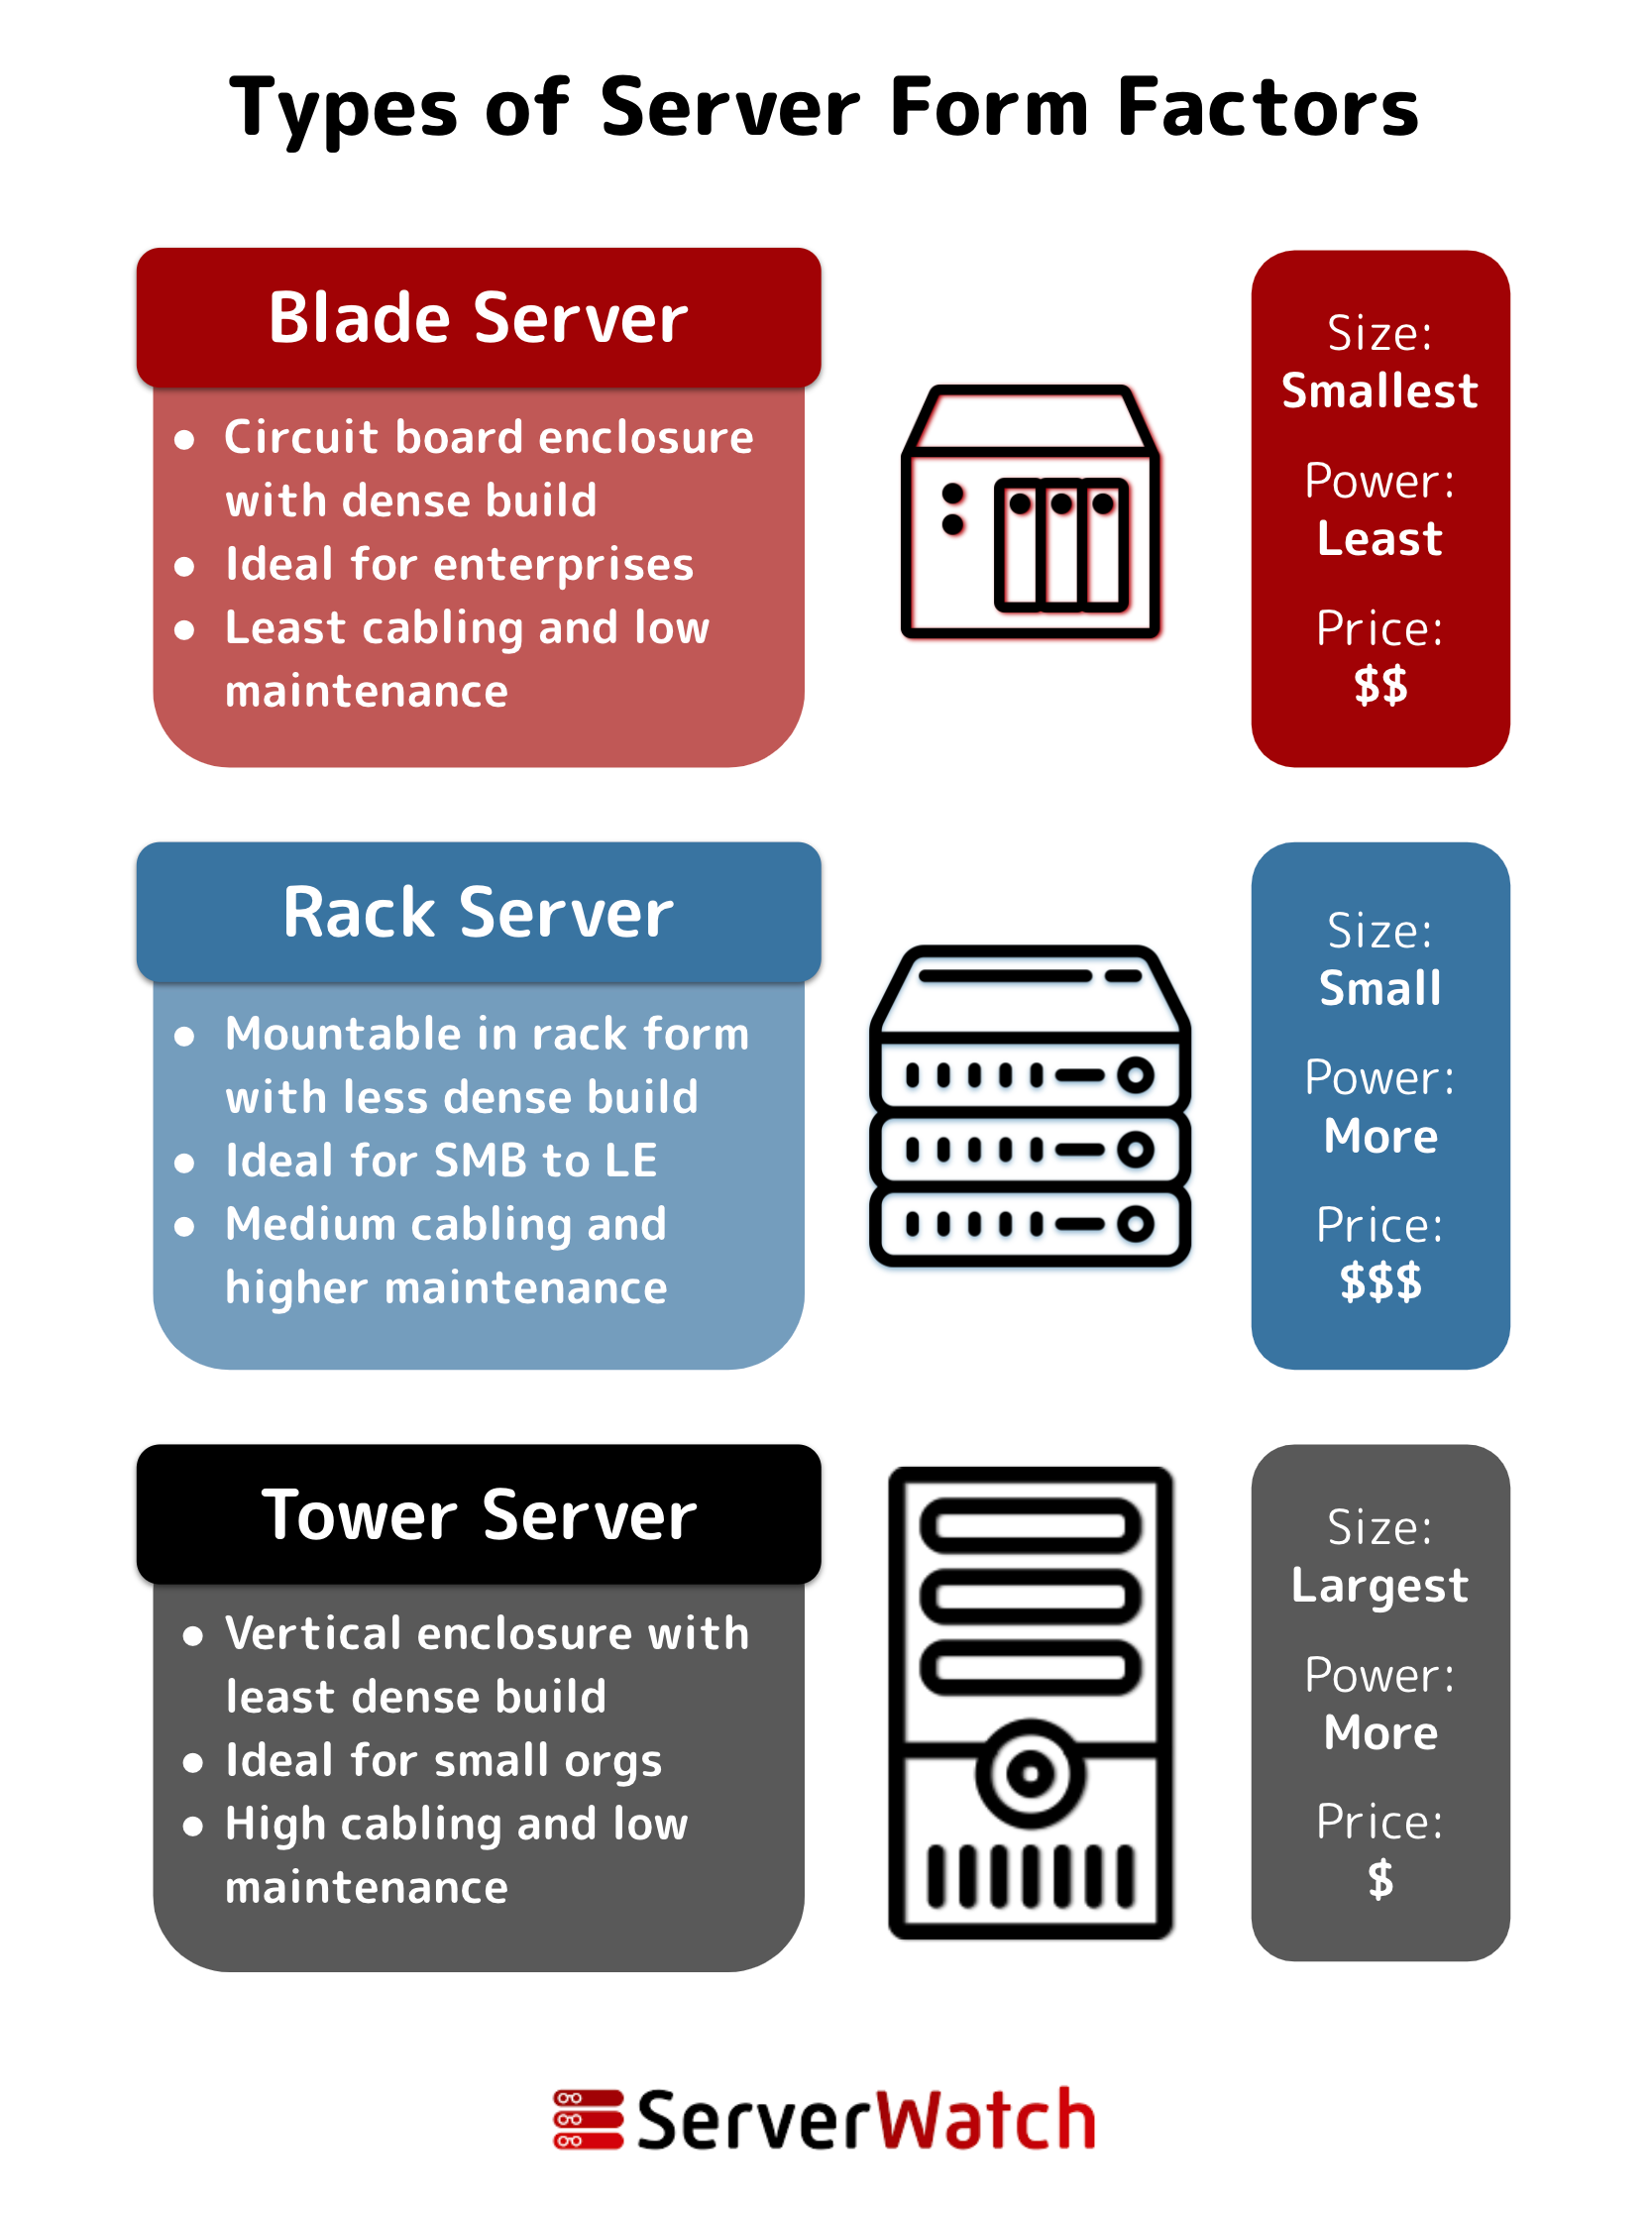 A graphic showing the differences between server form factors, including blade servers, rack servers, and tower servers. Designed by Sam Ingalls.